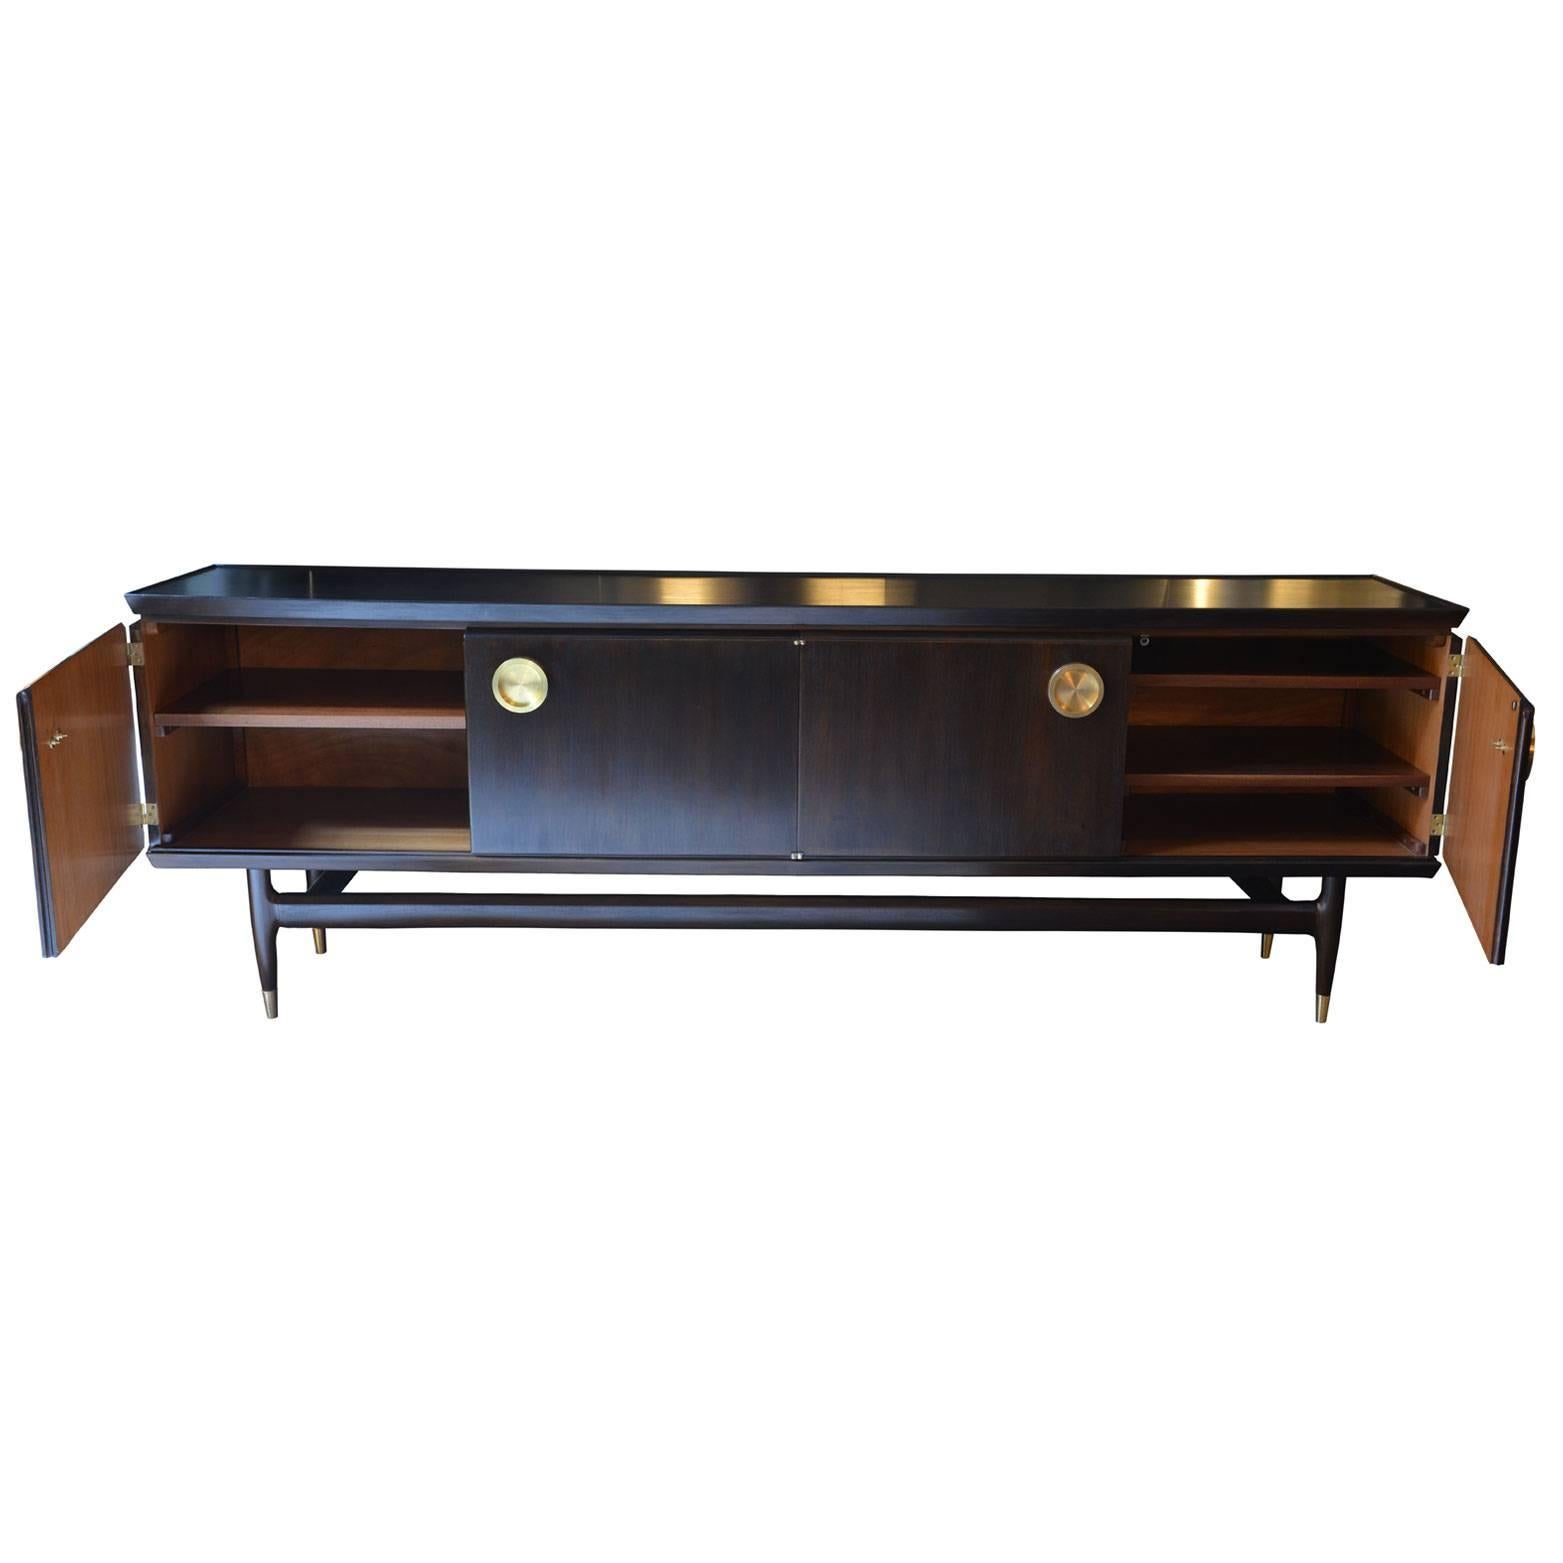 We have revisited this stunning French credenza, changing the original wooden door knobs with beautifully worked circular brass handles and adding the brass tips at the base of the legs. The inside shelves can be removed.